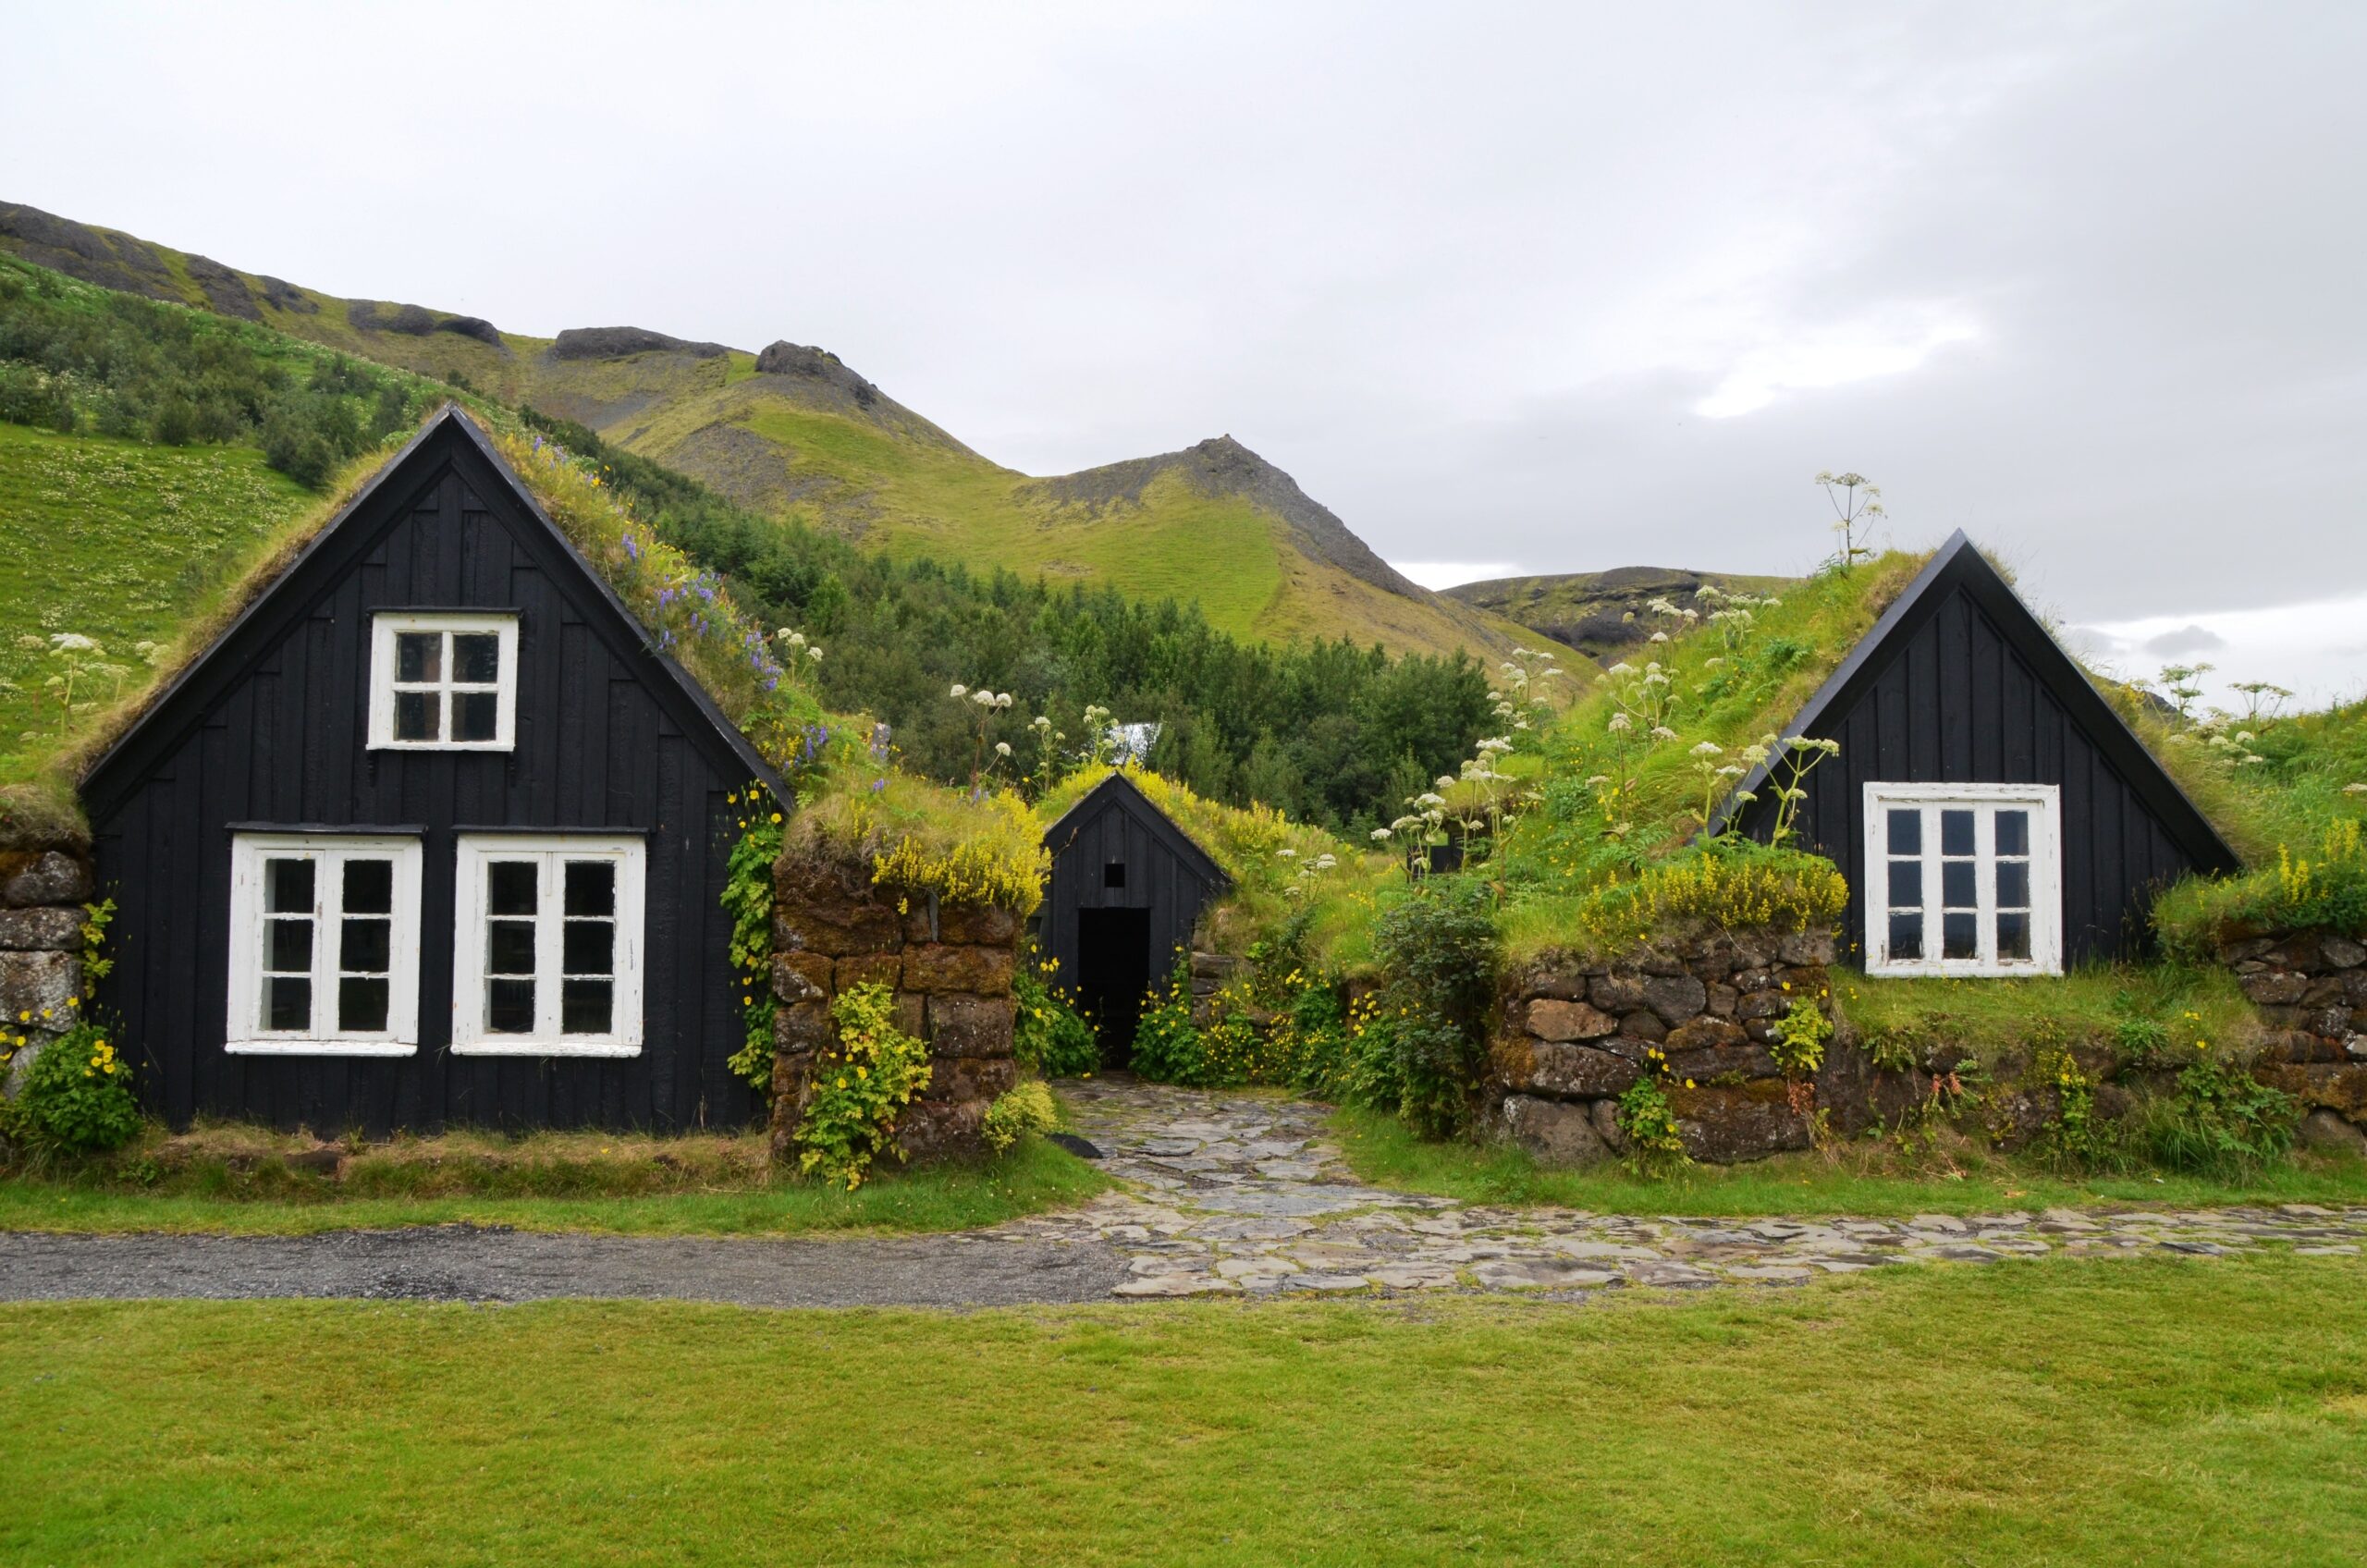 Tiny homes next to eachother with grass roofs